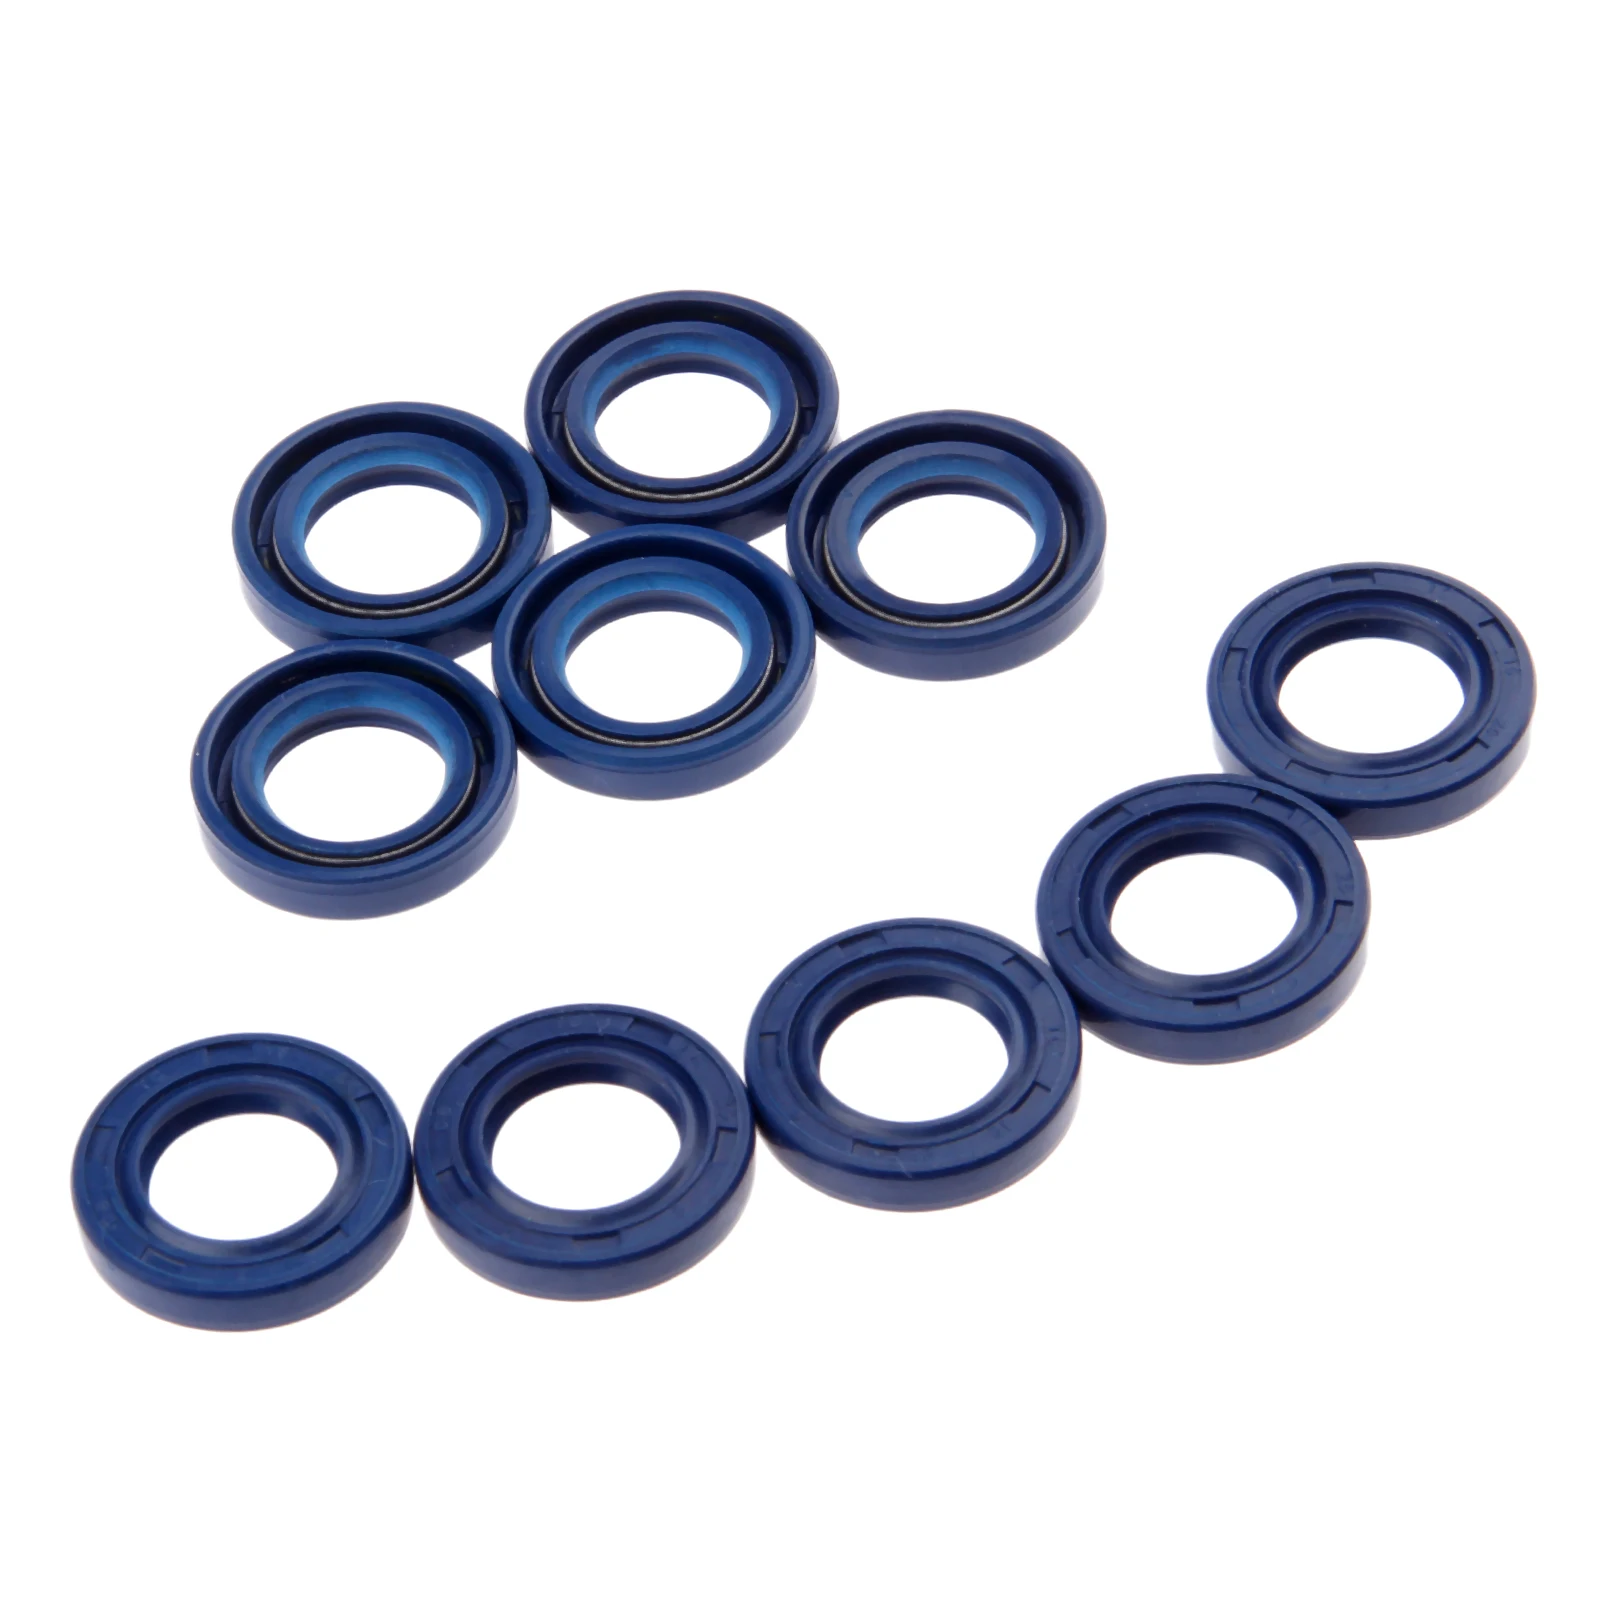 

10Pcs/lot Chainsaw Oil Seal Kit Replaces 9638 003 1581 For STIHL MS250 MS230 MS210 MS180 MS170 017 018 021 023 025 Chainsaw